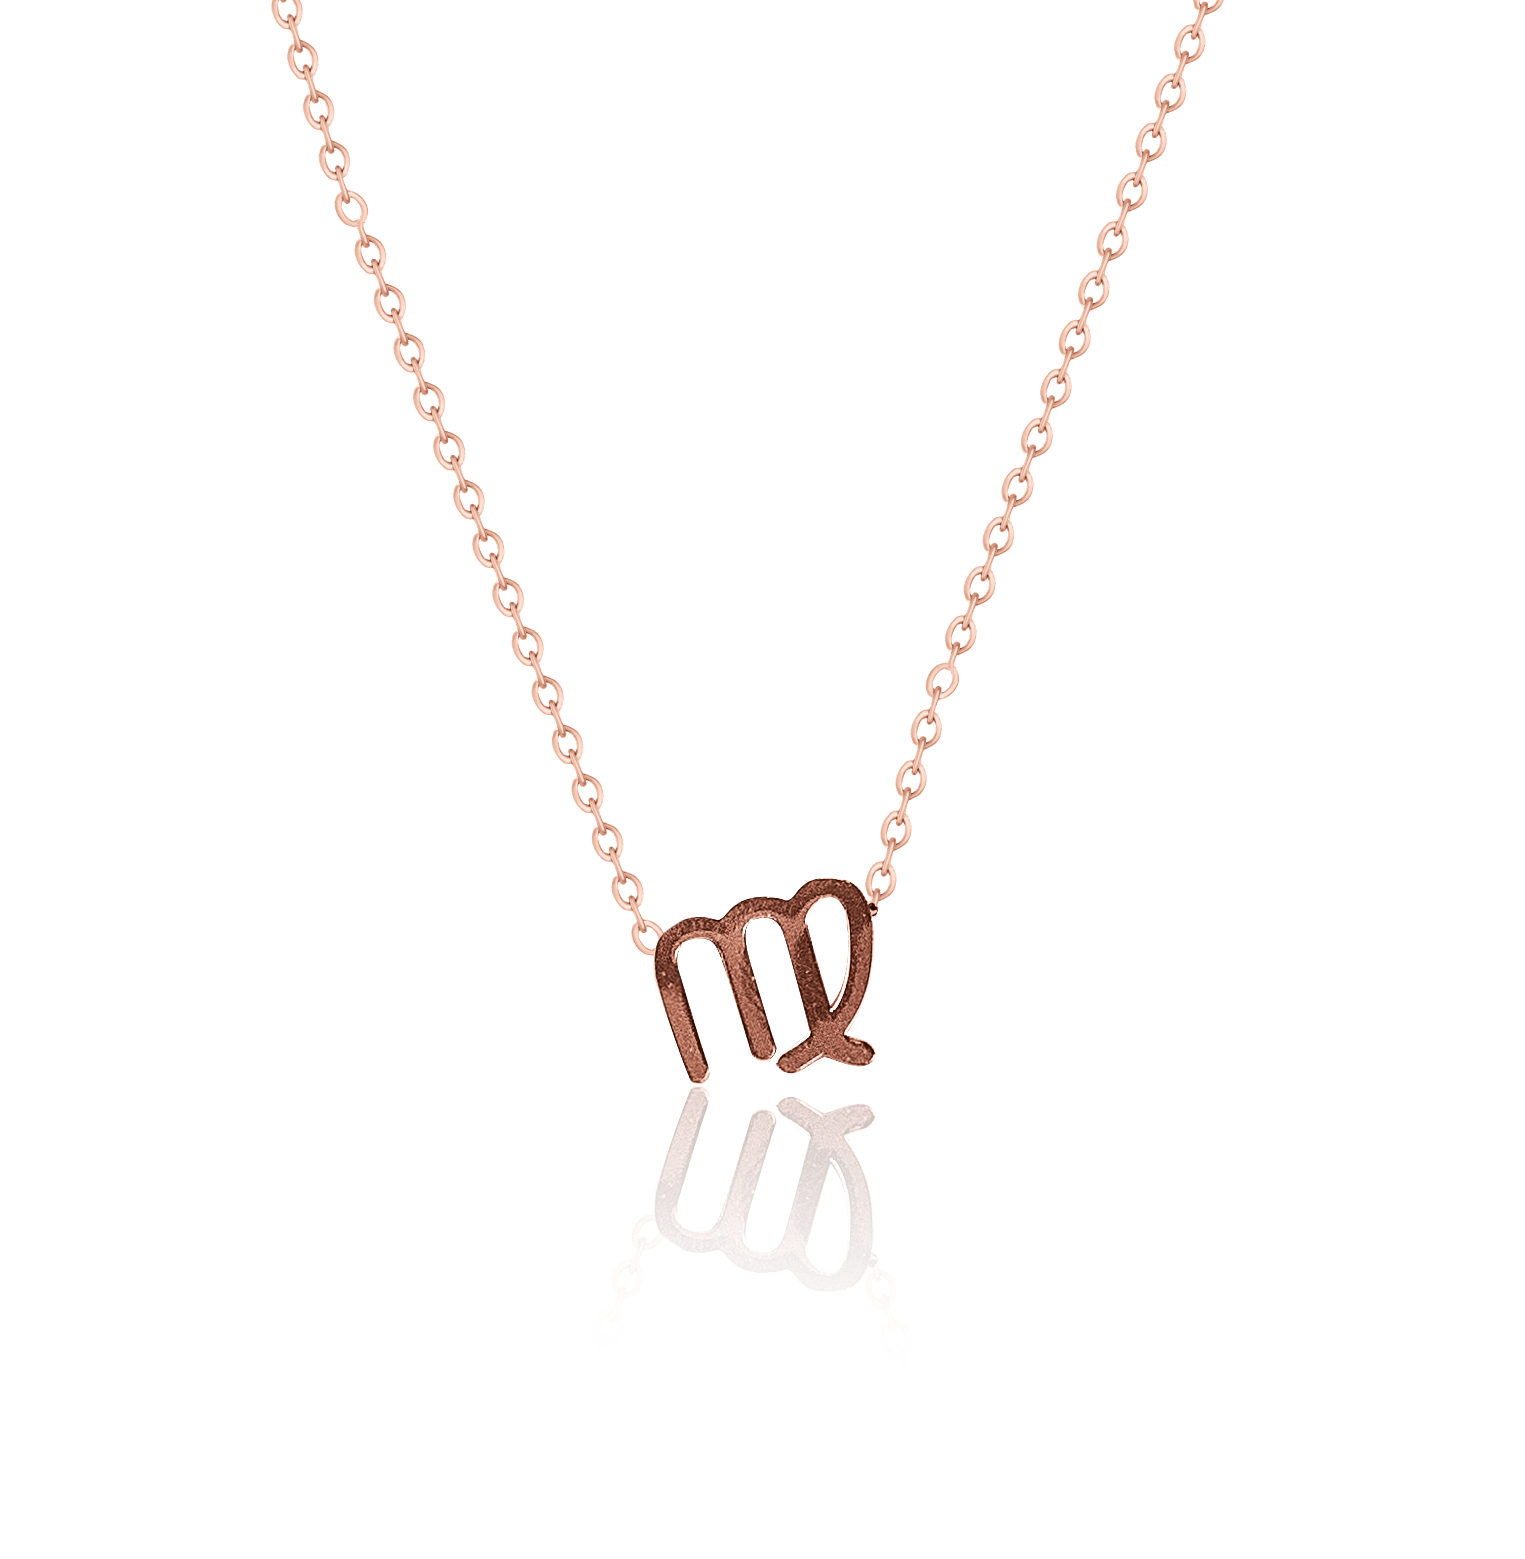 bianco rosso Necklaces Rose Gold Virgo - Necklace cyprus greece jewelry gift free shipping europe worldwide